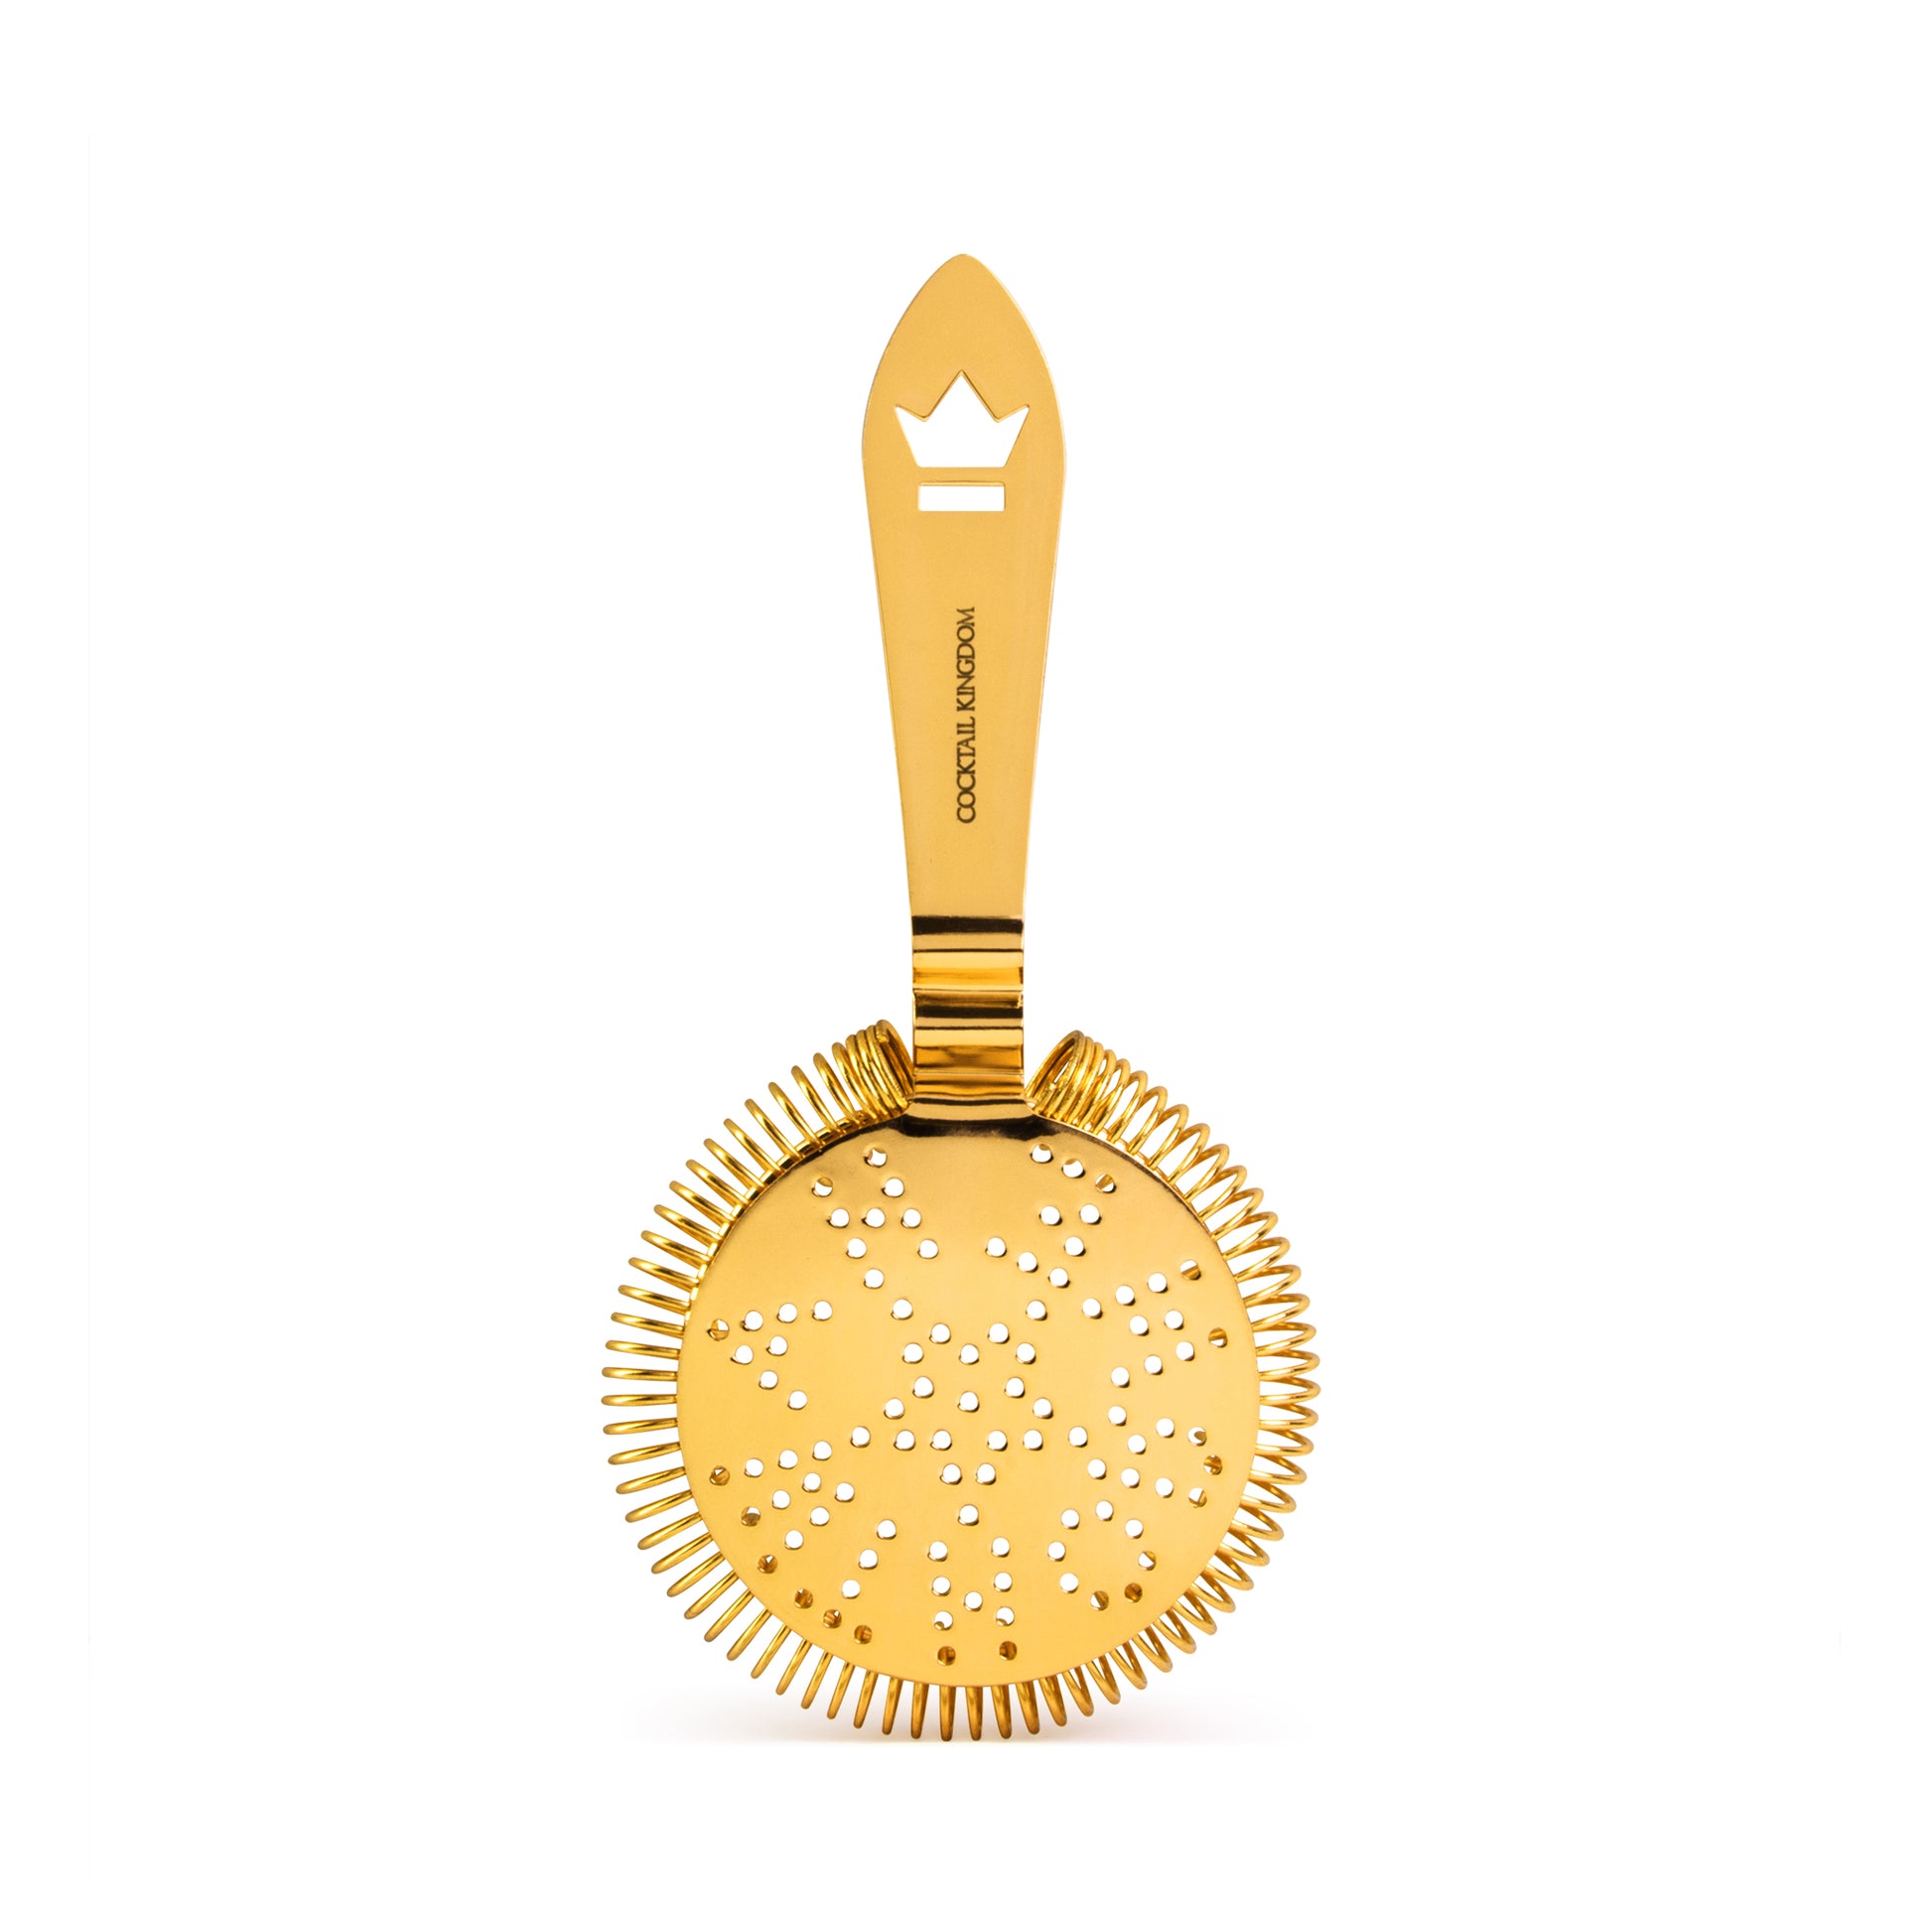 ANTIQUE-STYLE COCKTAIL STRAINER / GOLD-PLATED